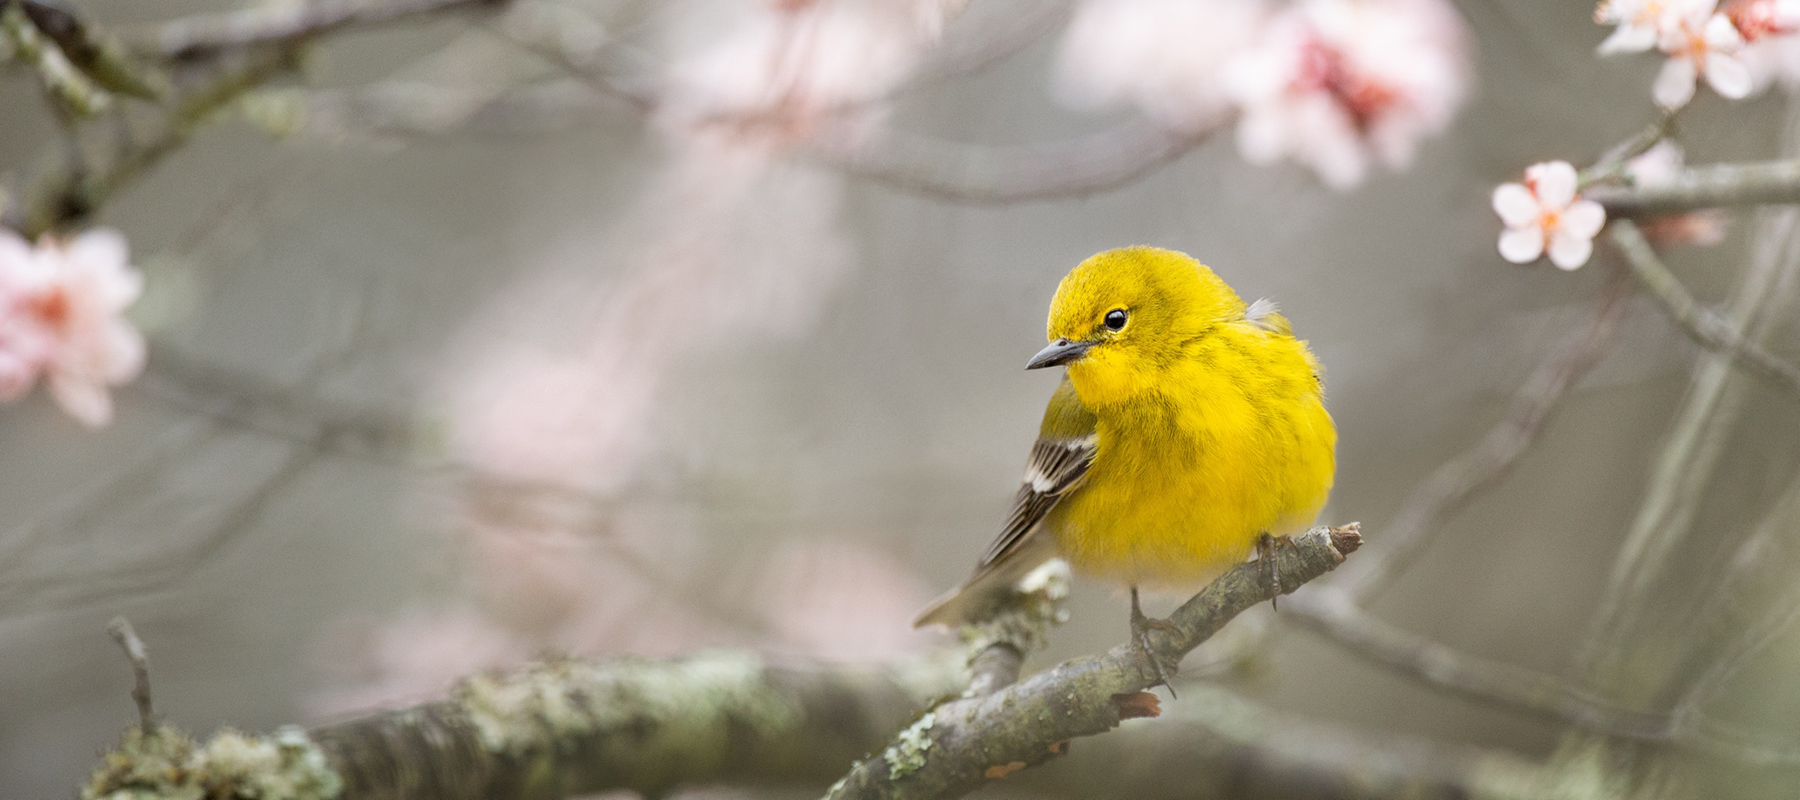 American Carbon Registry Native American Hardwoods Project Yellow Warbler and blossum